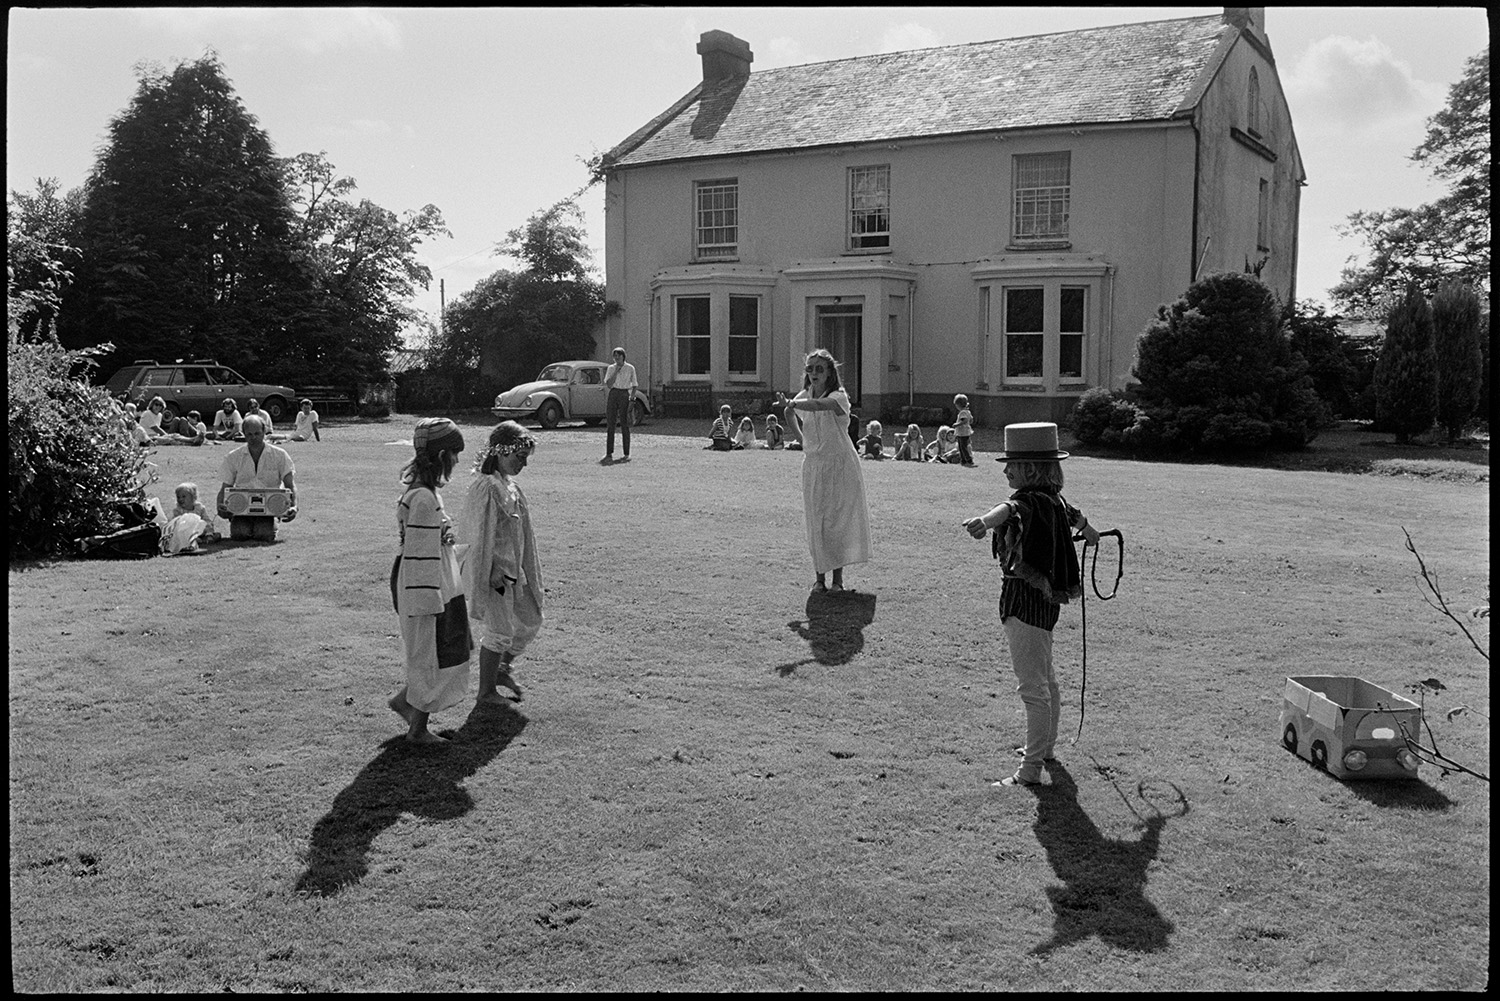 Children's ballet class dance performance on lawn of country house. 
[A woman teaching a ballet class to children on the lawn in front of Broadwoodkelly Rectory, which is visible in the background. The children are wearing costumes.]